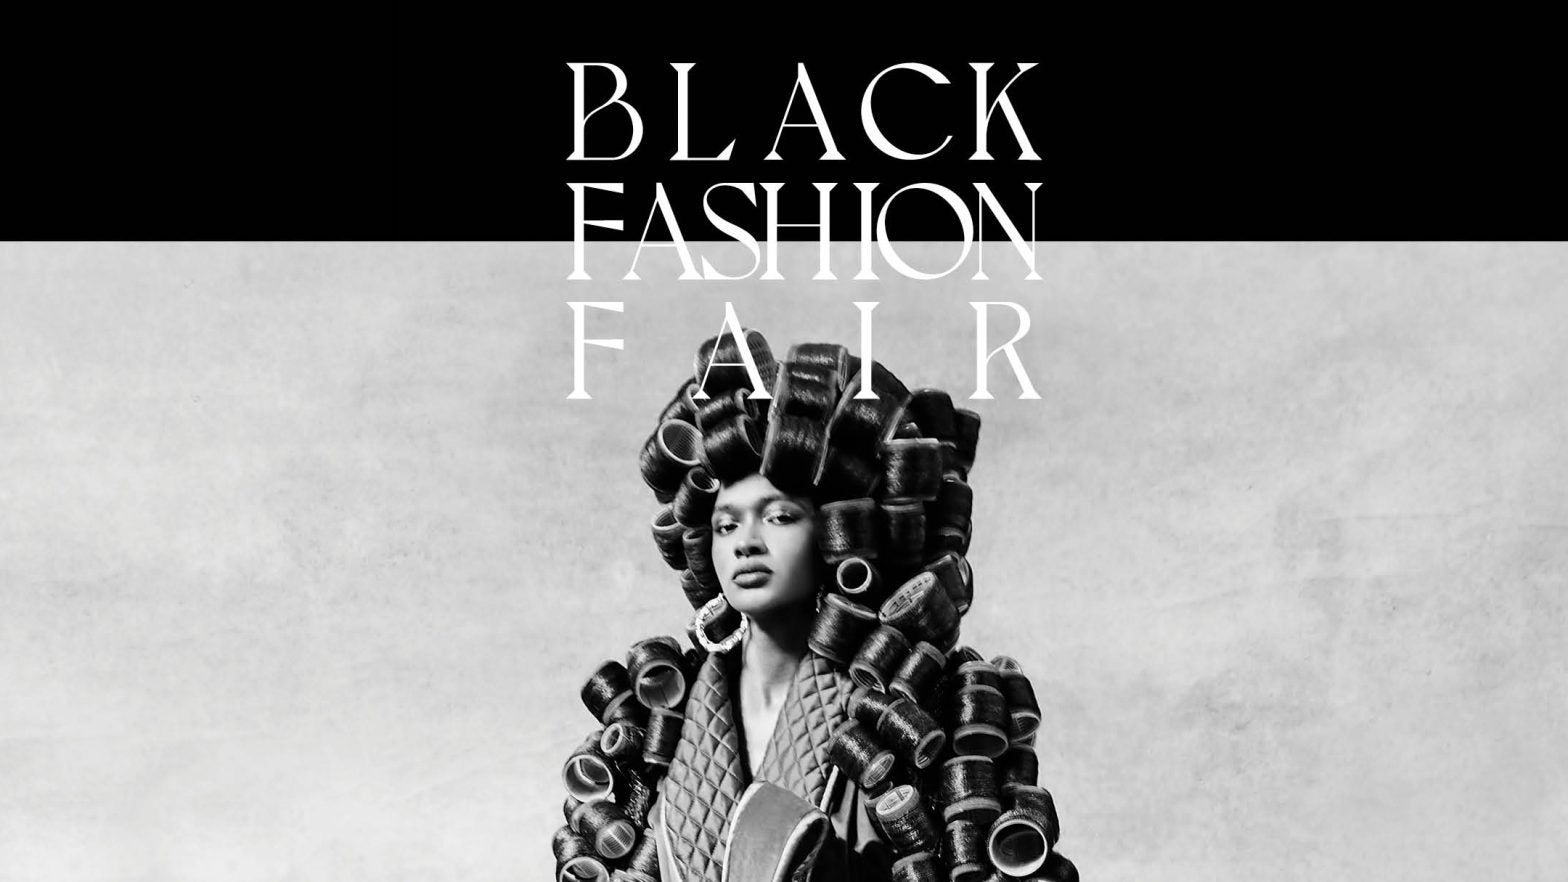 Black Fashion Fair Gathers Black Fashion Talent To Release Its First Publication